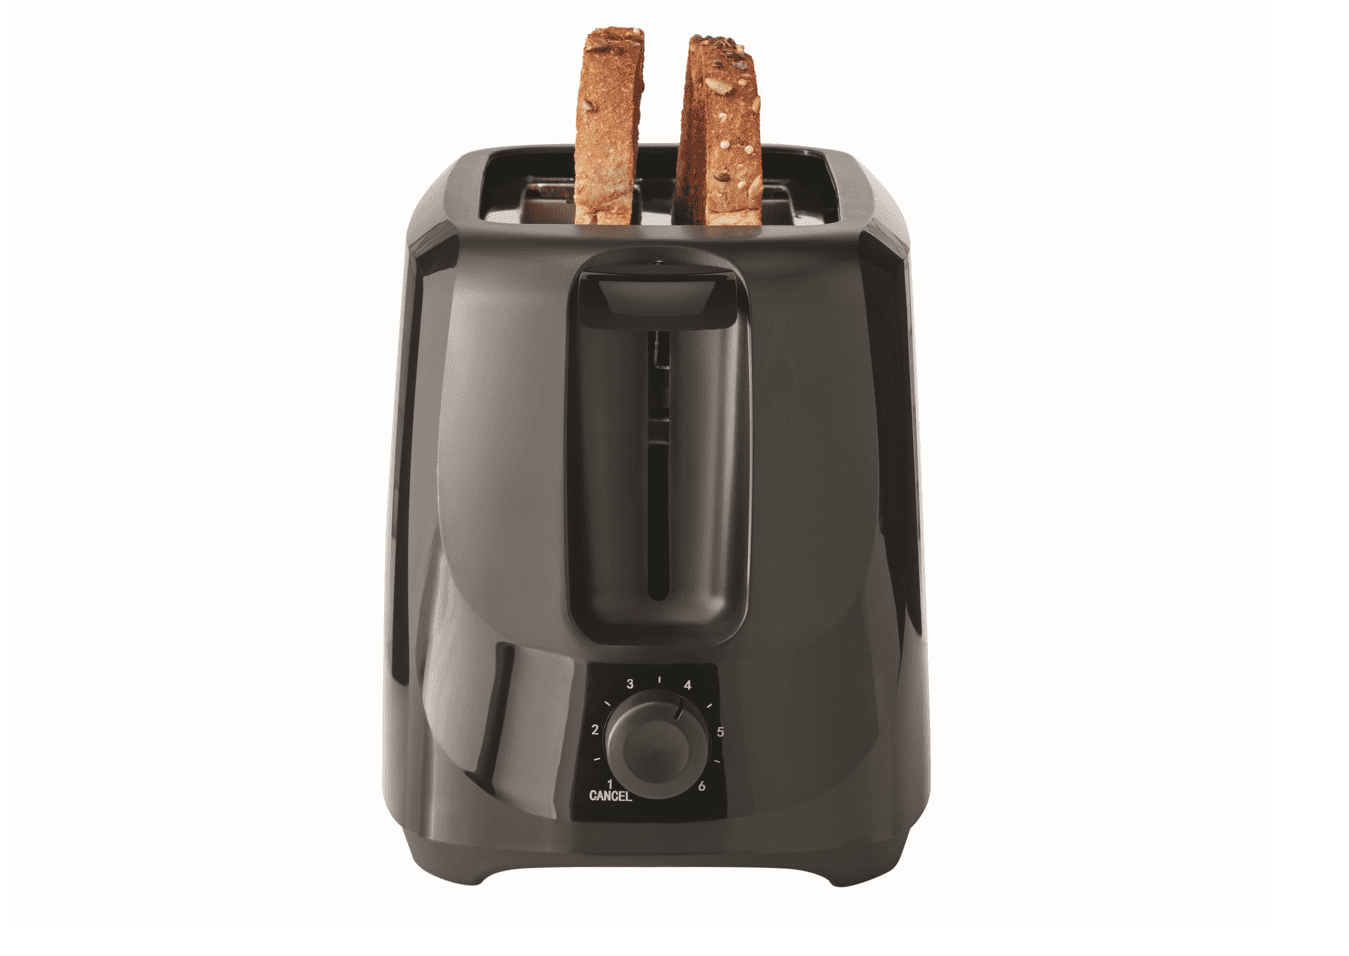 Mainstays 2-Slice Toaster Black with 6 Shade Settings and Removable Crumb Tray